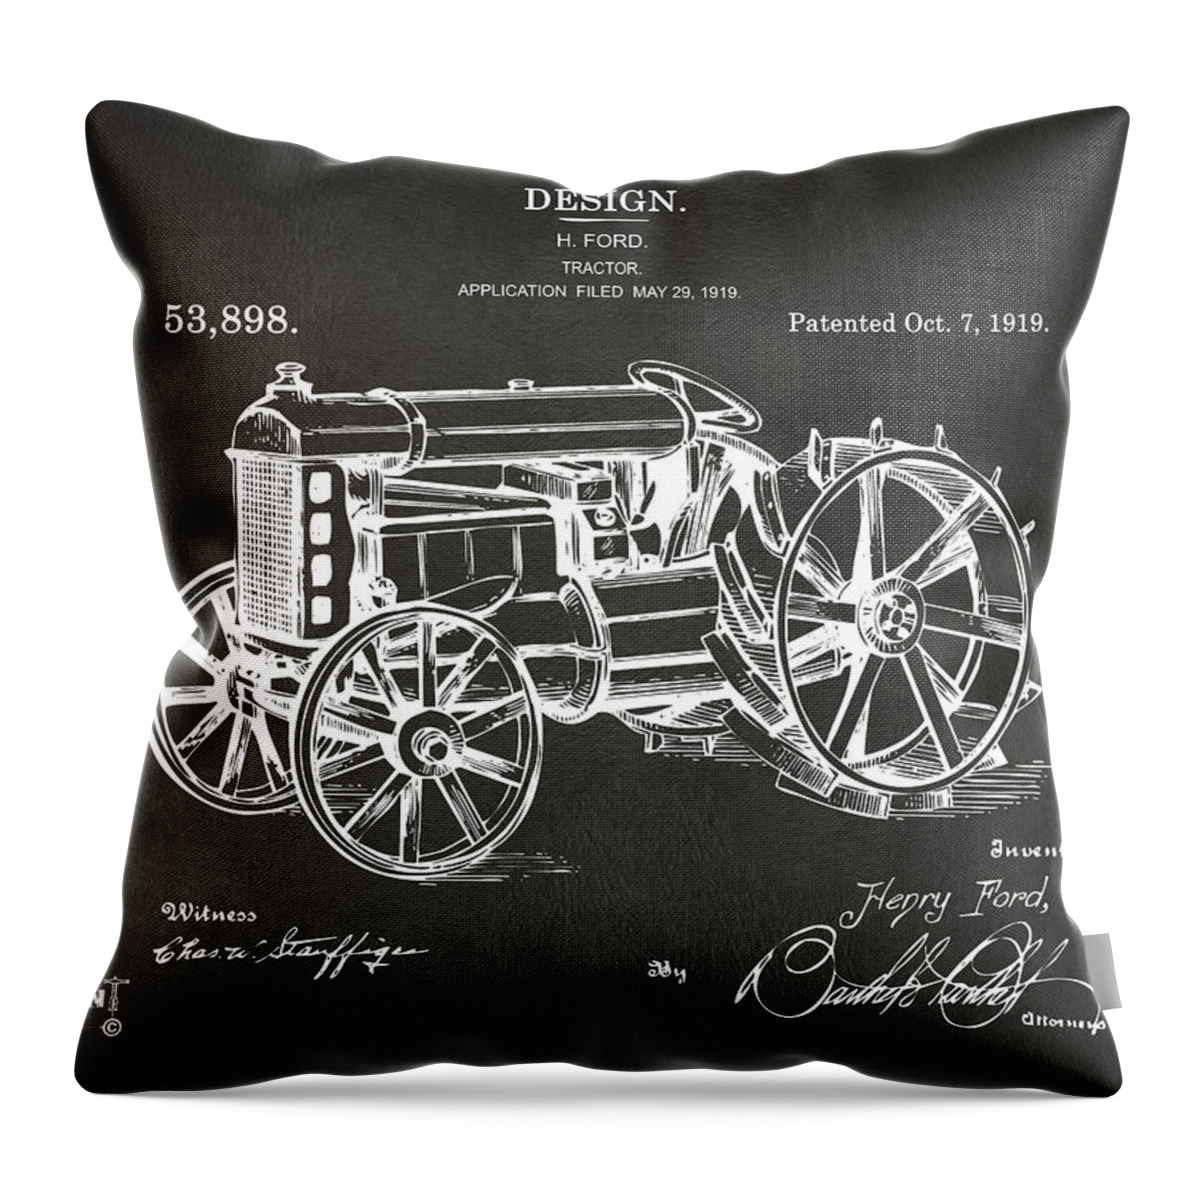 Henry Ford Throw Pillow featuring the digital art 1919 Henry Ford Tractor Patent Gray by Nikki Marie Smith